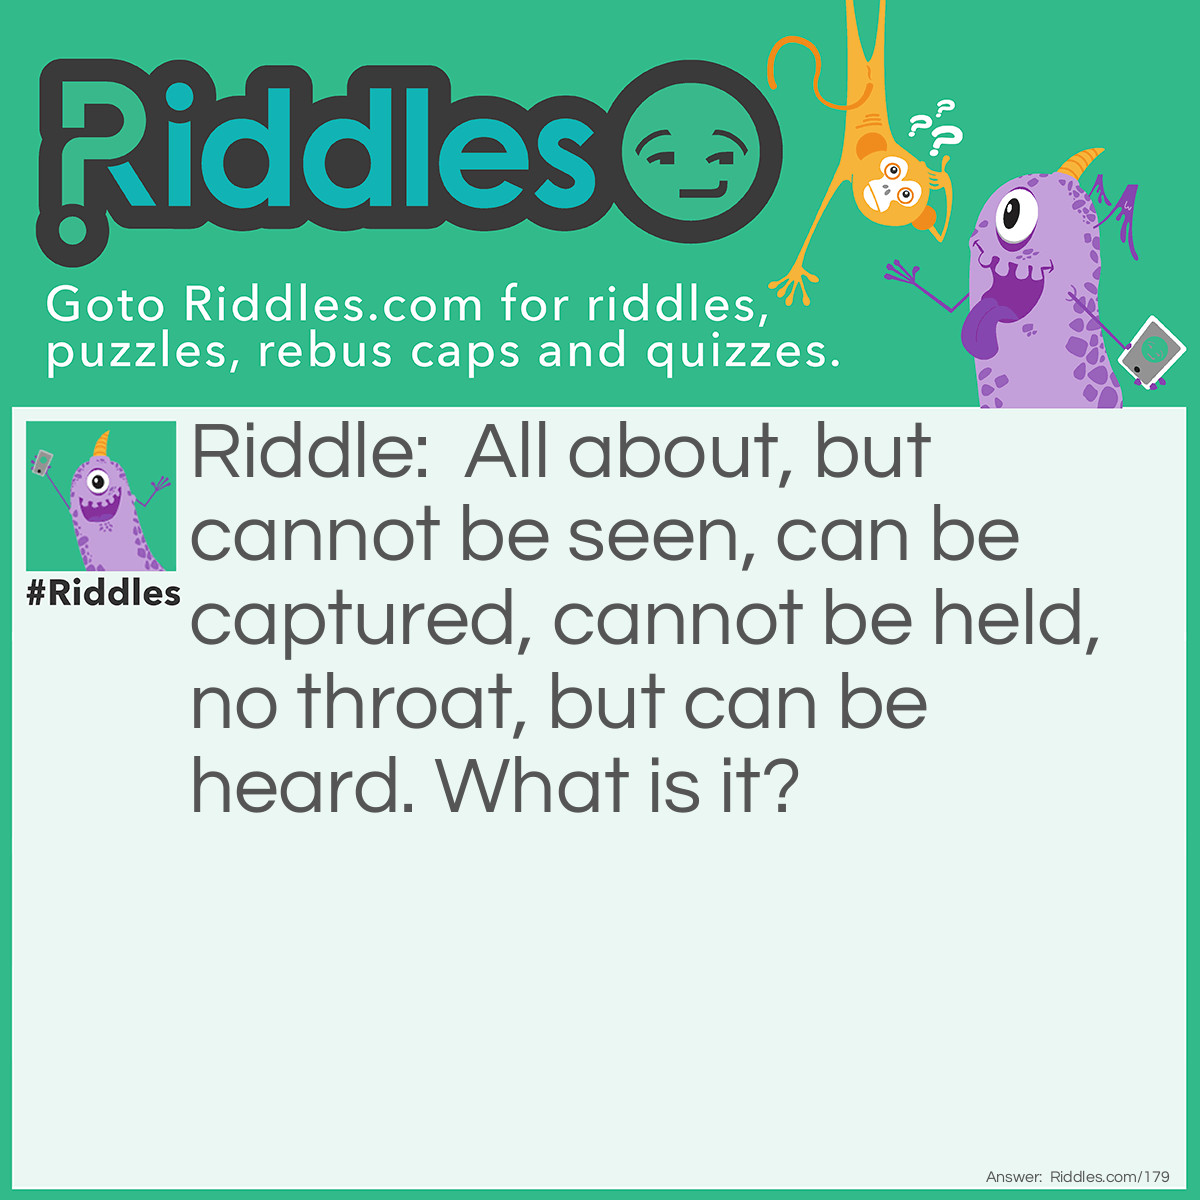 Riddle: All about, but cannot be seen, Can be captured, cannot be held, No throat, but can be heard. What is it? Answer: The wind.